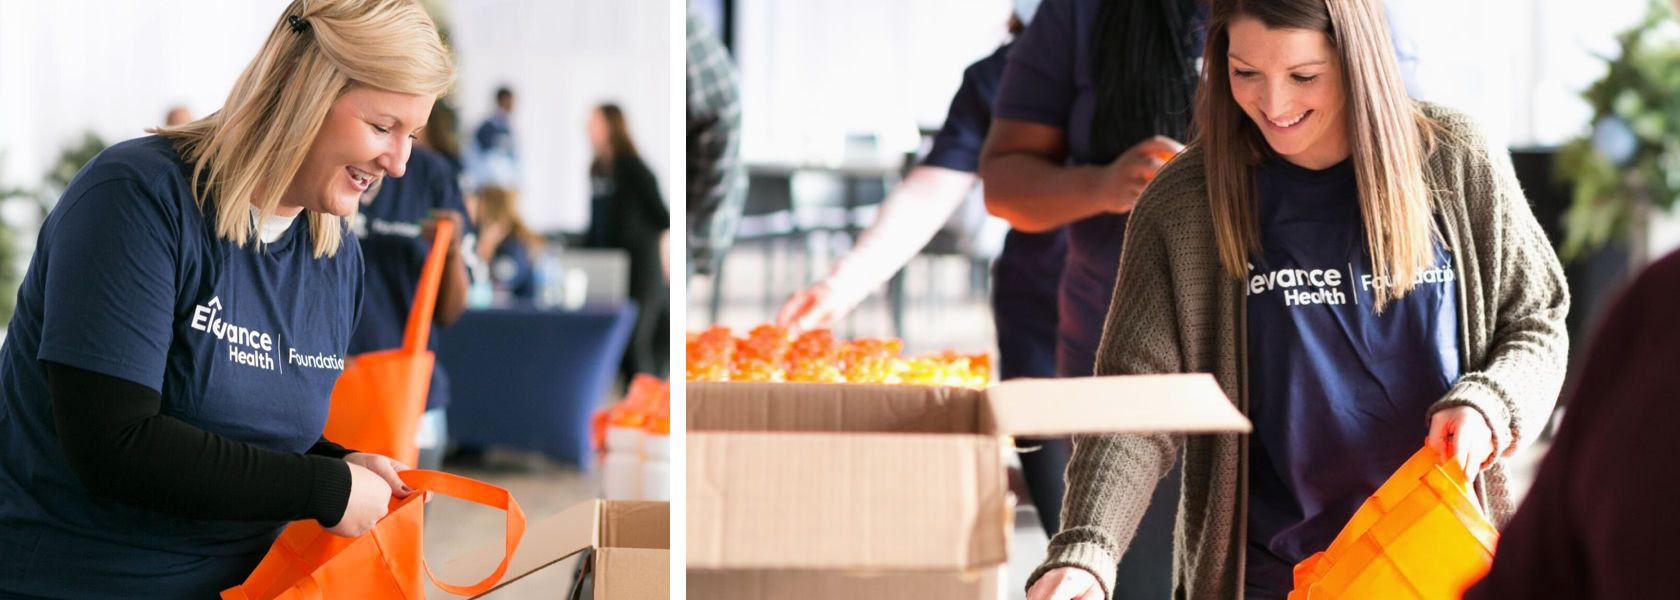 Two Elevance Health associates standing in a line packing food from boxes into orange bags.